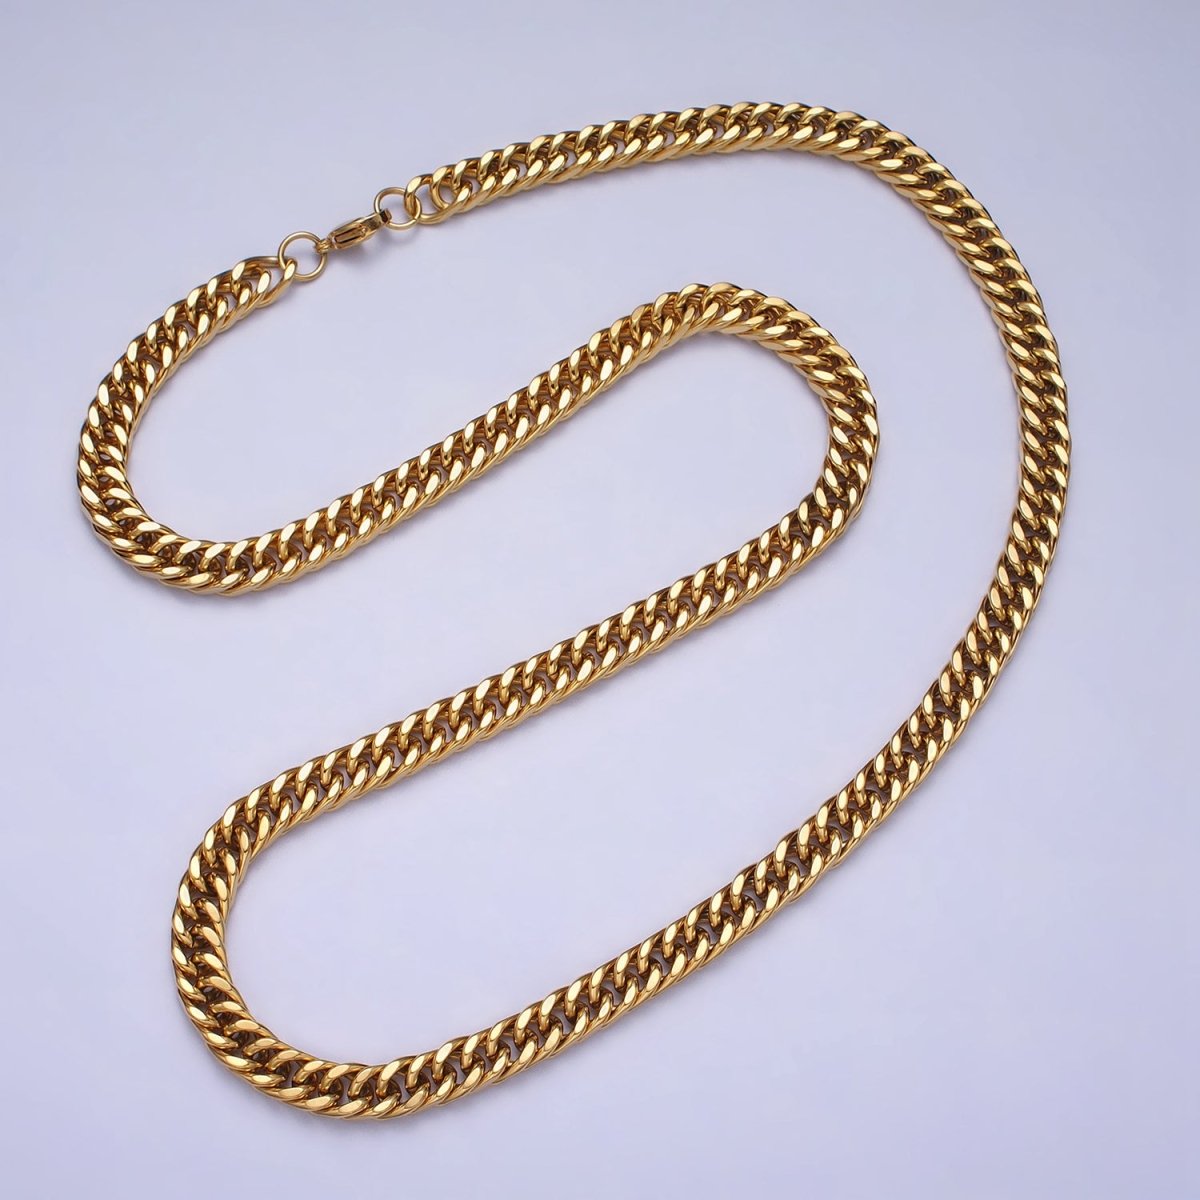 Men's Chain Necklace, Cuban Link Chain Necklace, Stainless Steel Silver Chain, 7mm Cuban Chain Necklace 23.5 inch | WA-1591 WA-1592 Clearance Pricing - DLUXCA